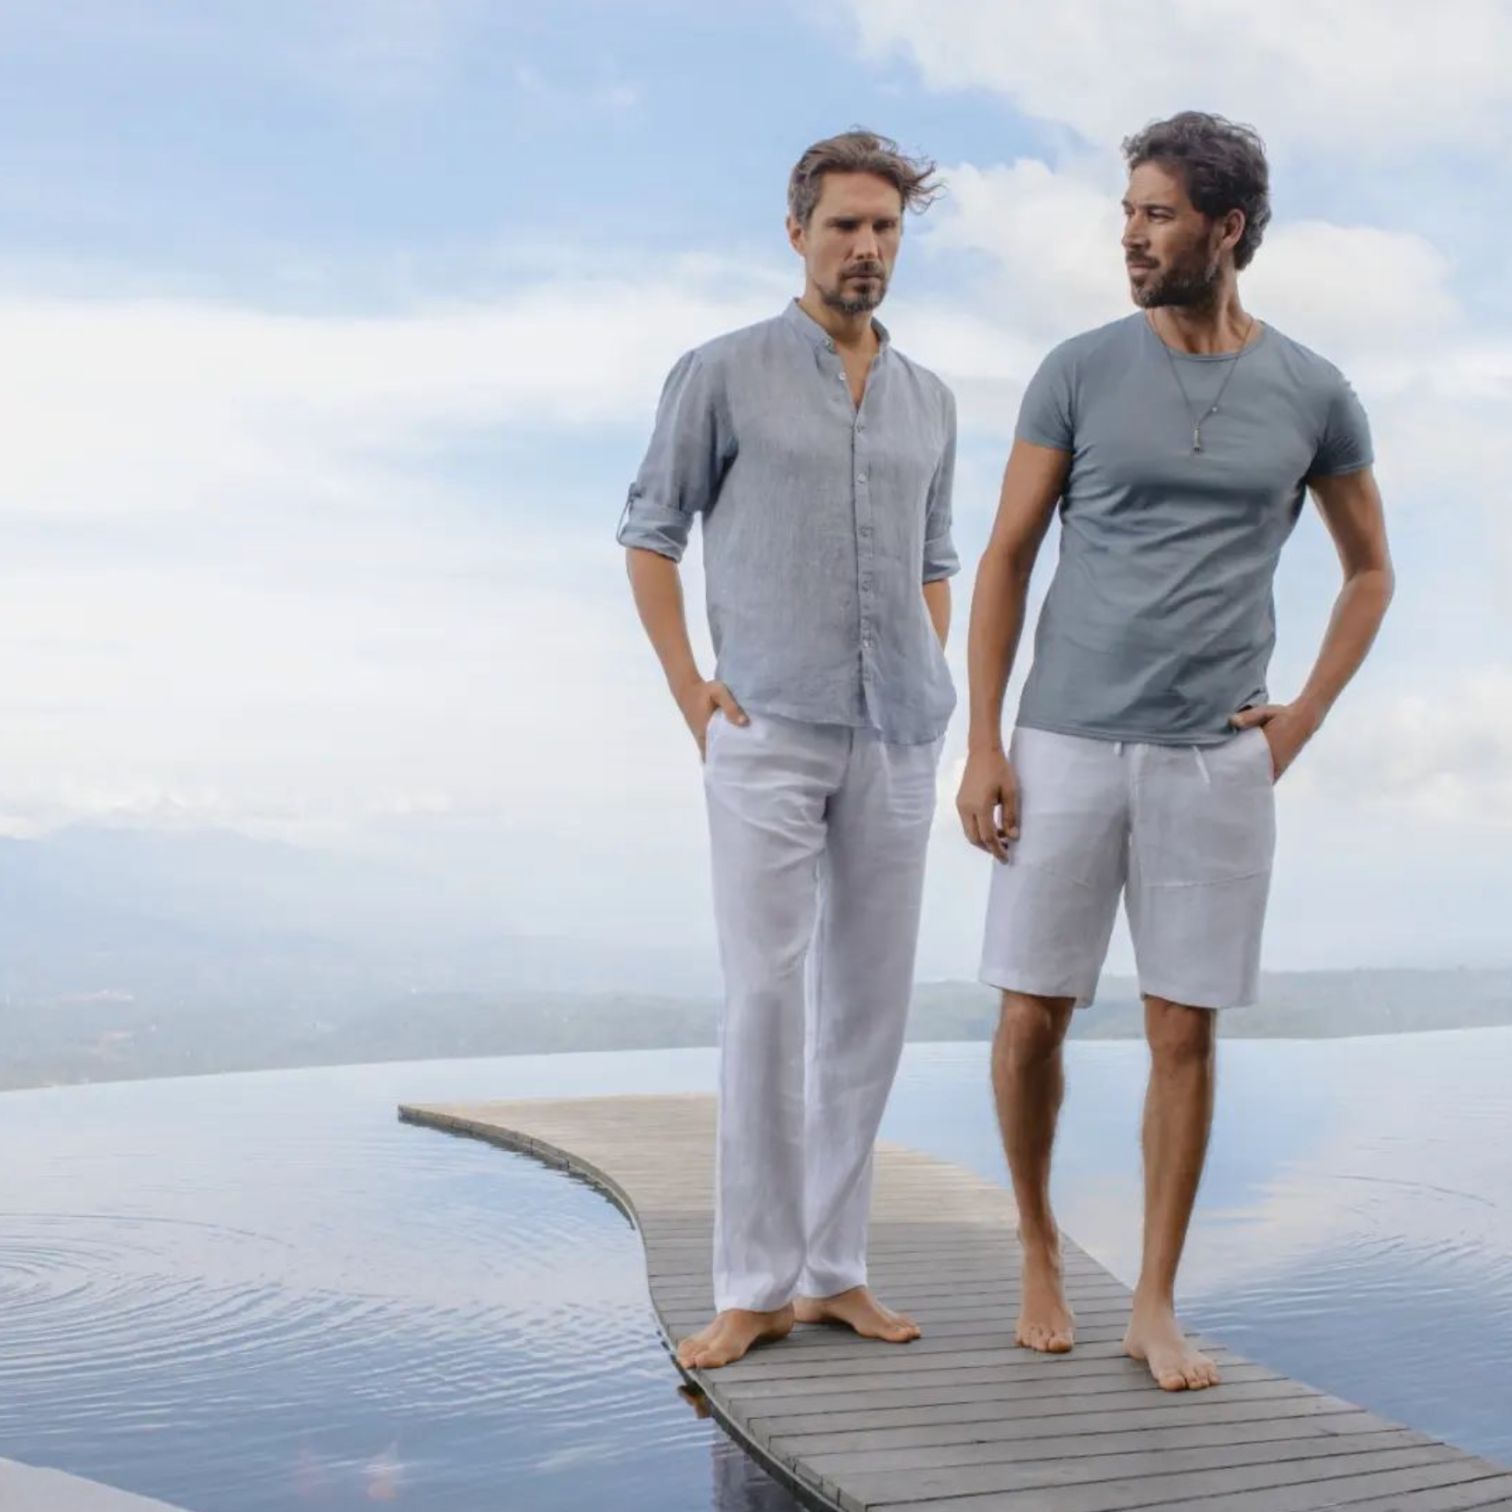 A Couple Of Men Standing On A Dock With Water And A Cloudy Sky